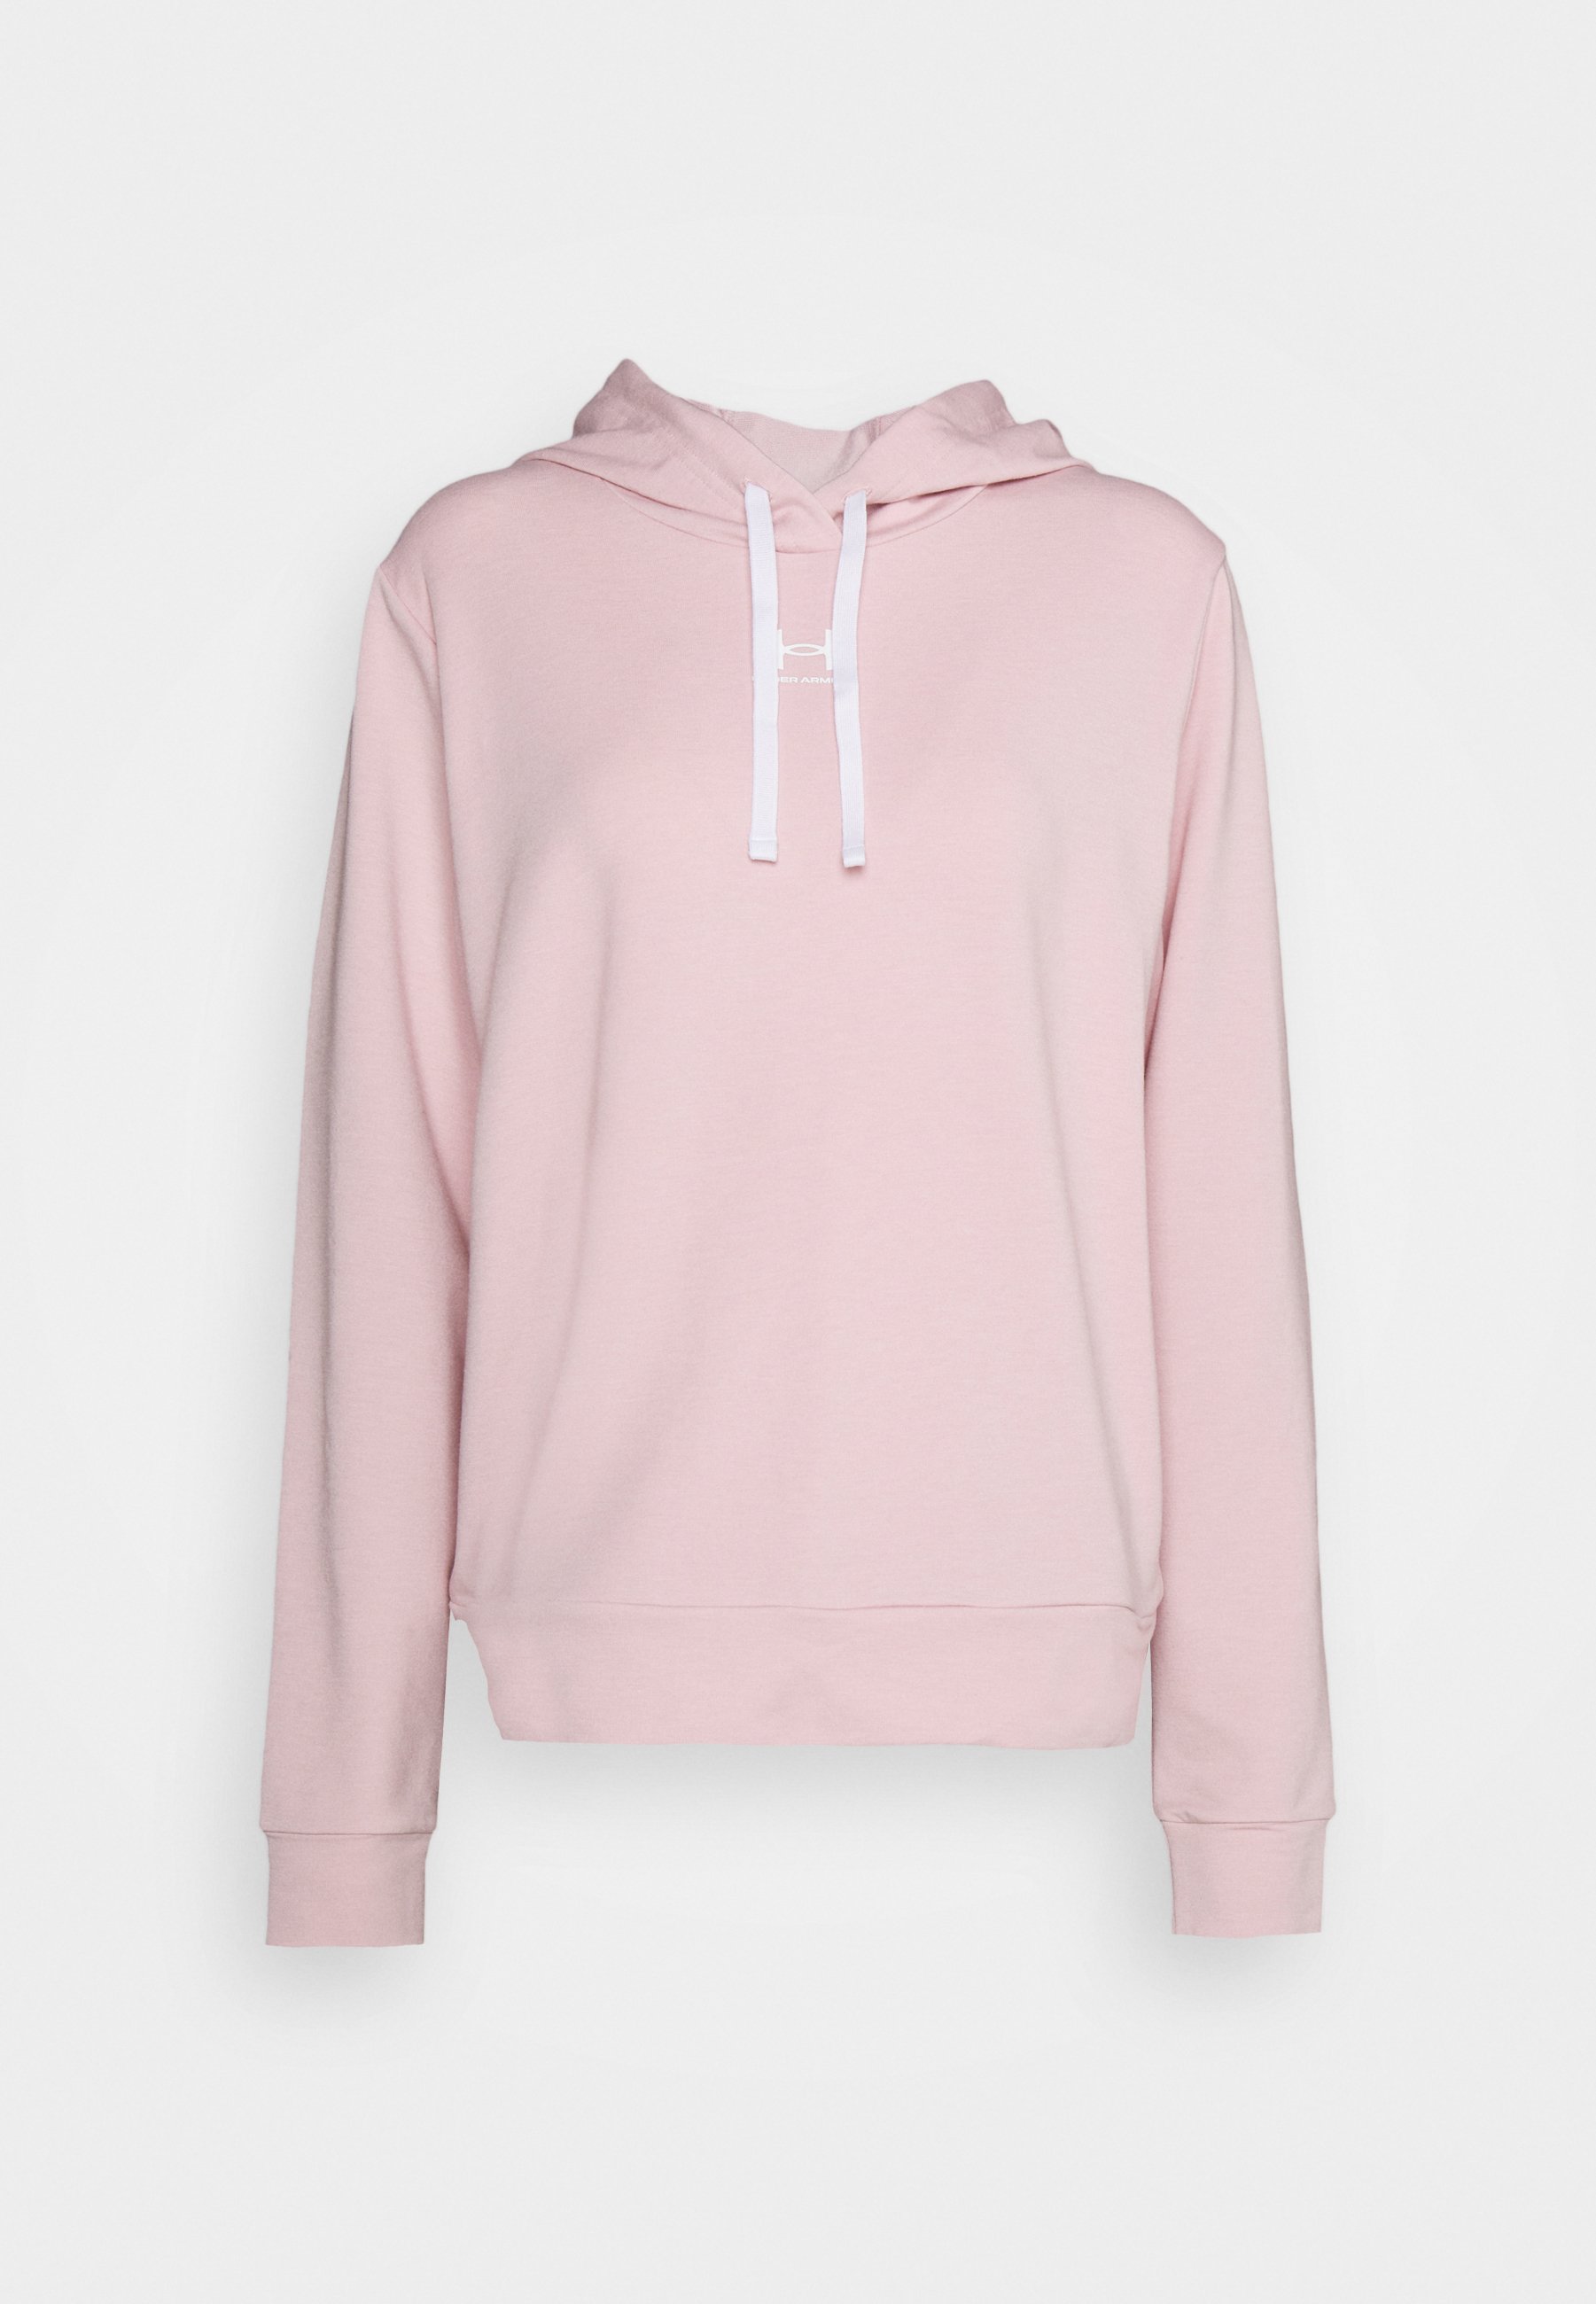 Under Armour RIVAL TERRY HOODIE - Kapuzenpullover - retro pink/white/pink